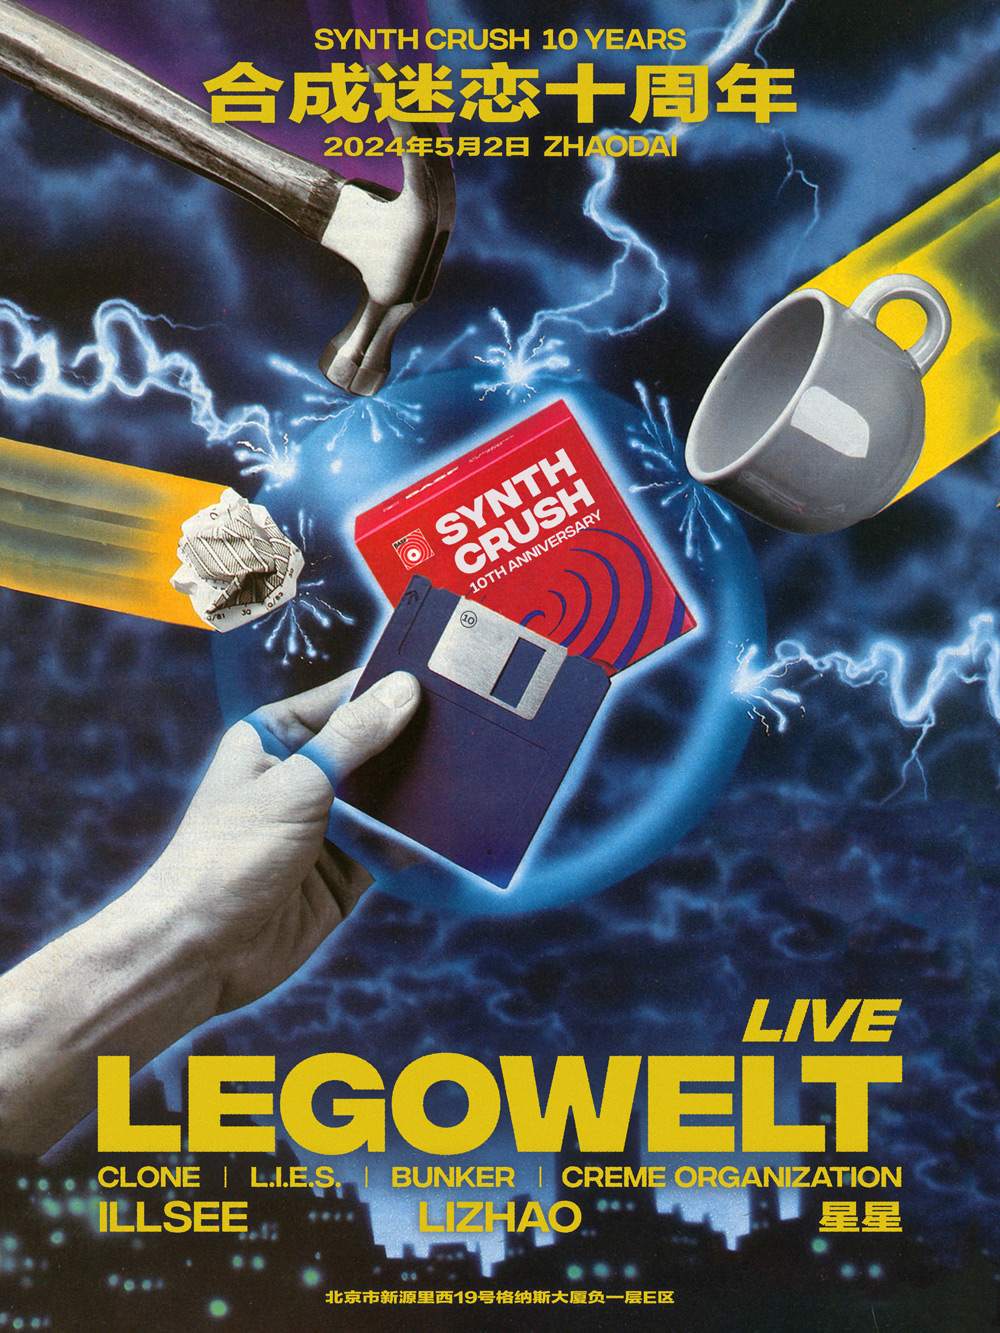 Synth Crush 10 Years pres. Legowelt (Live) - フライヤー表